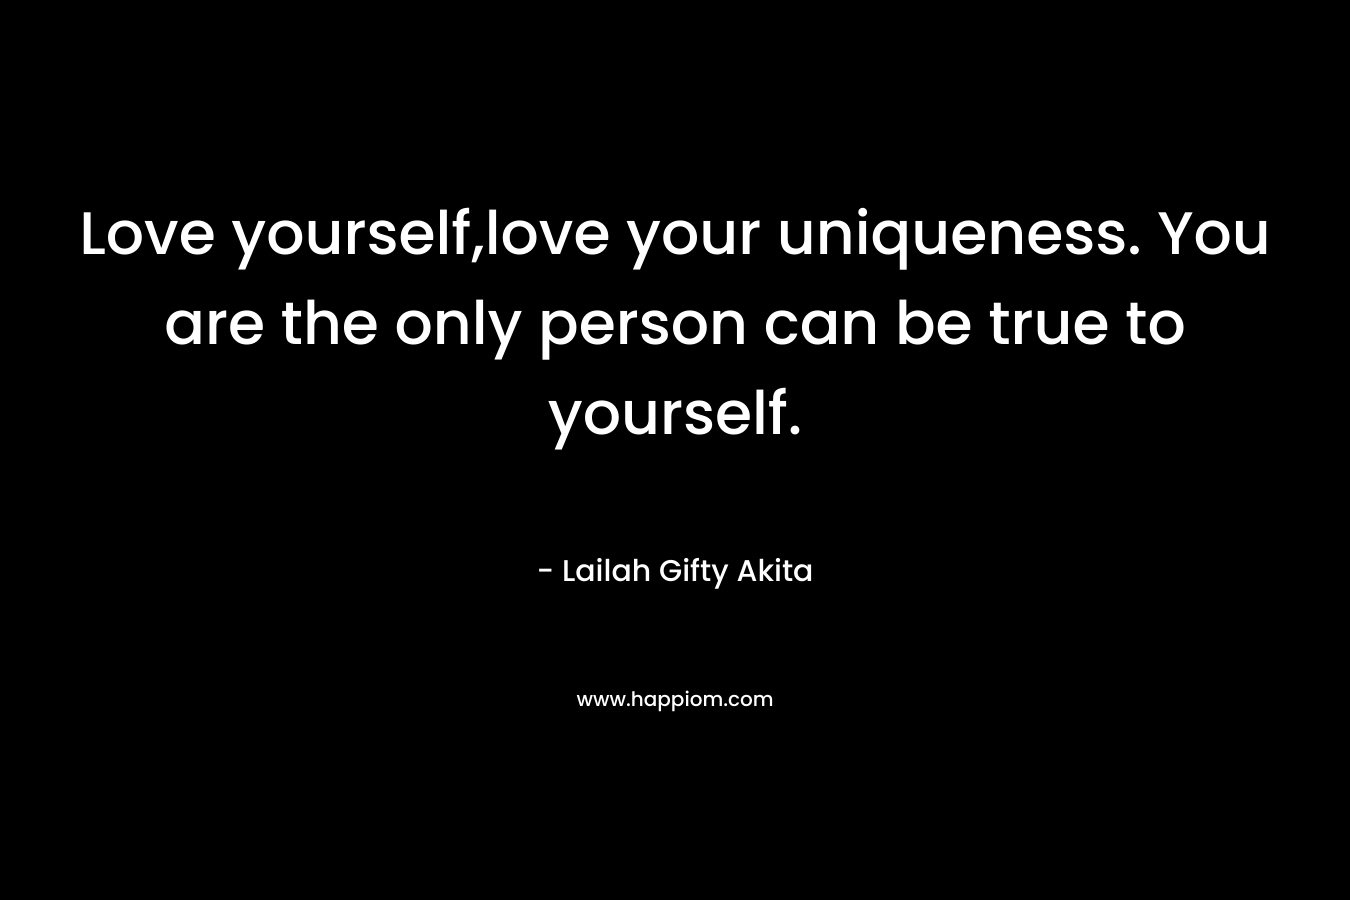 Love yourself,love your uniqueness. You are the only person can be true to yourself.